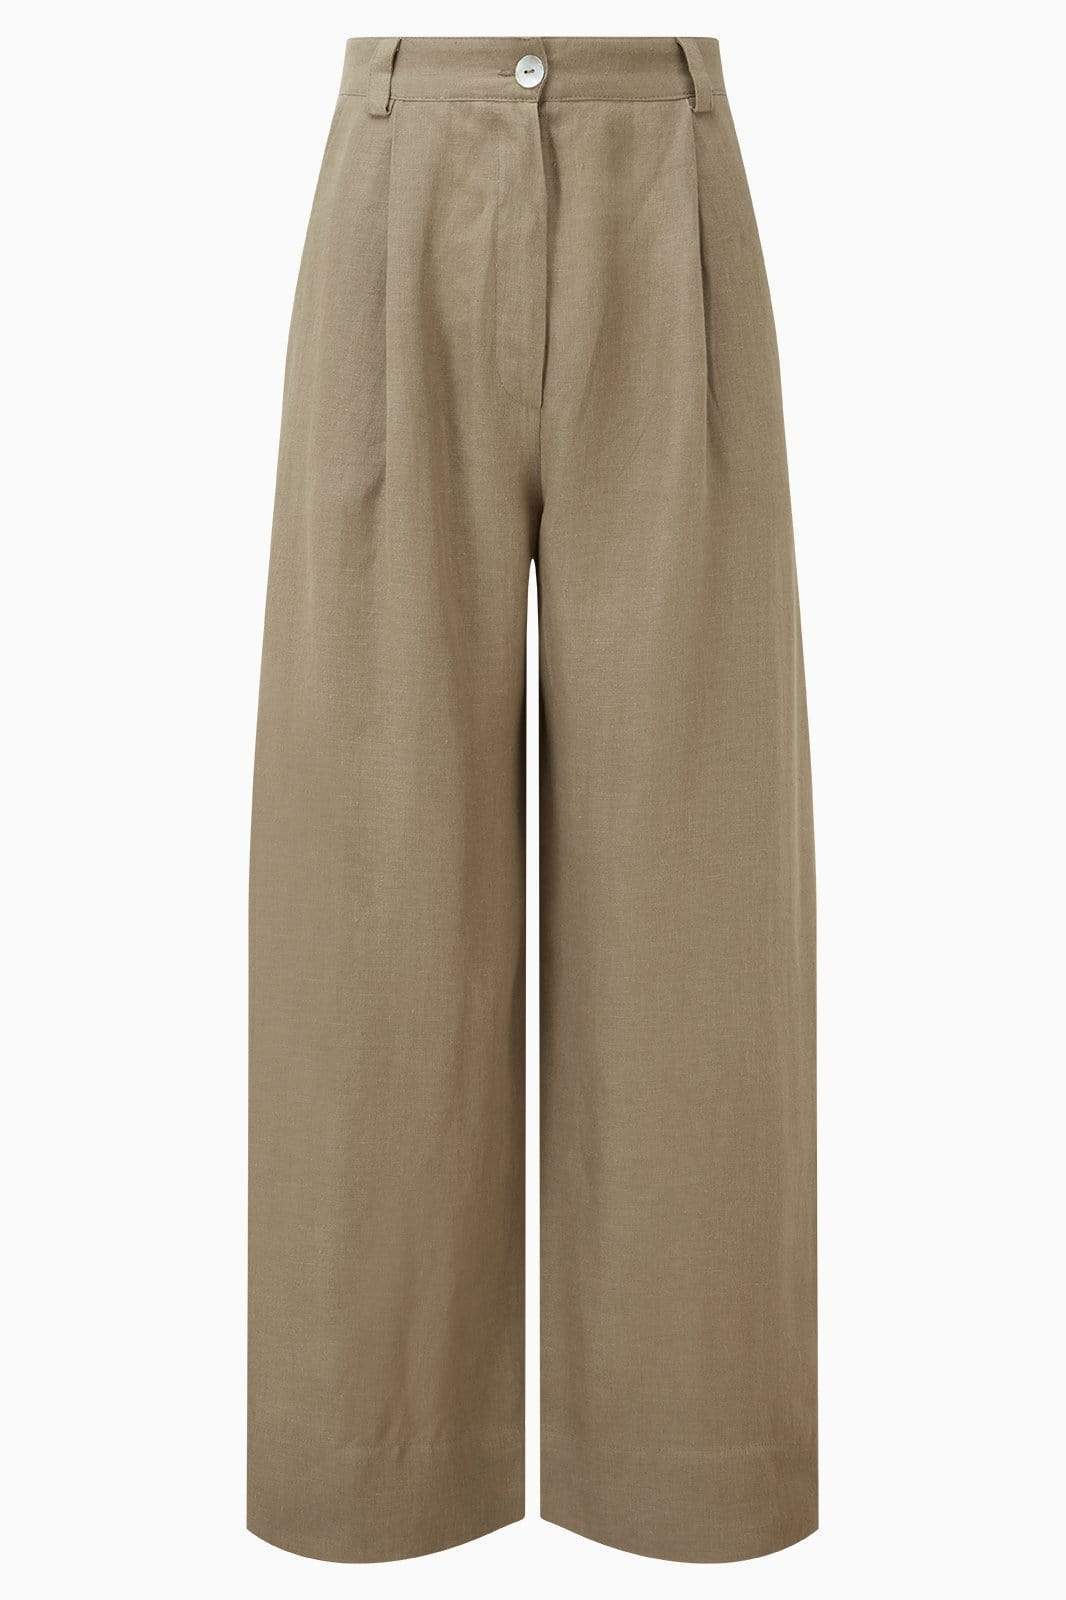 arkitaip Trousers The Wabi Pleated Linen Trousers in Taupe